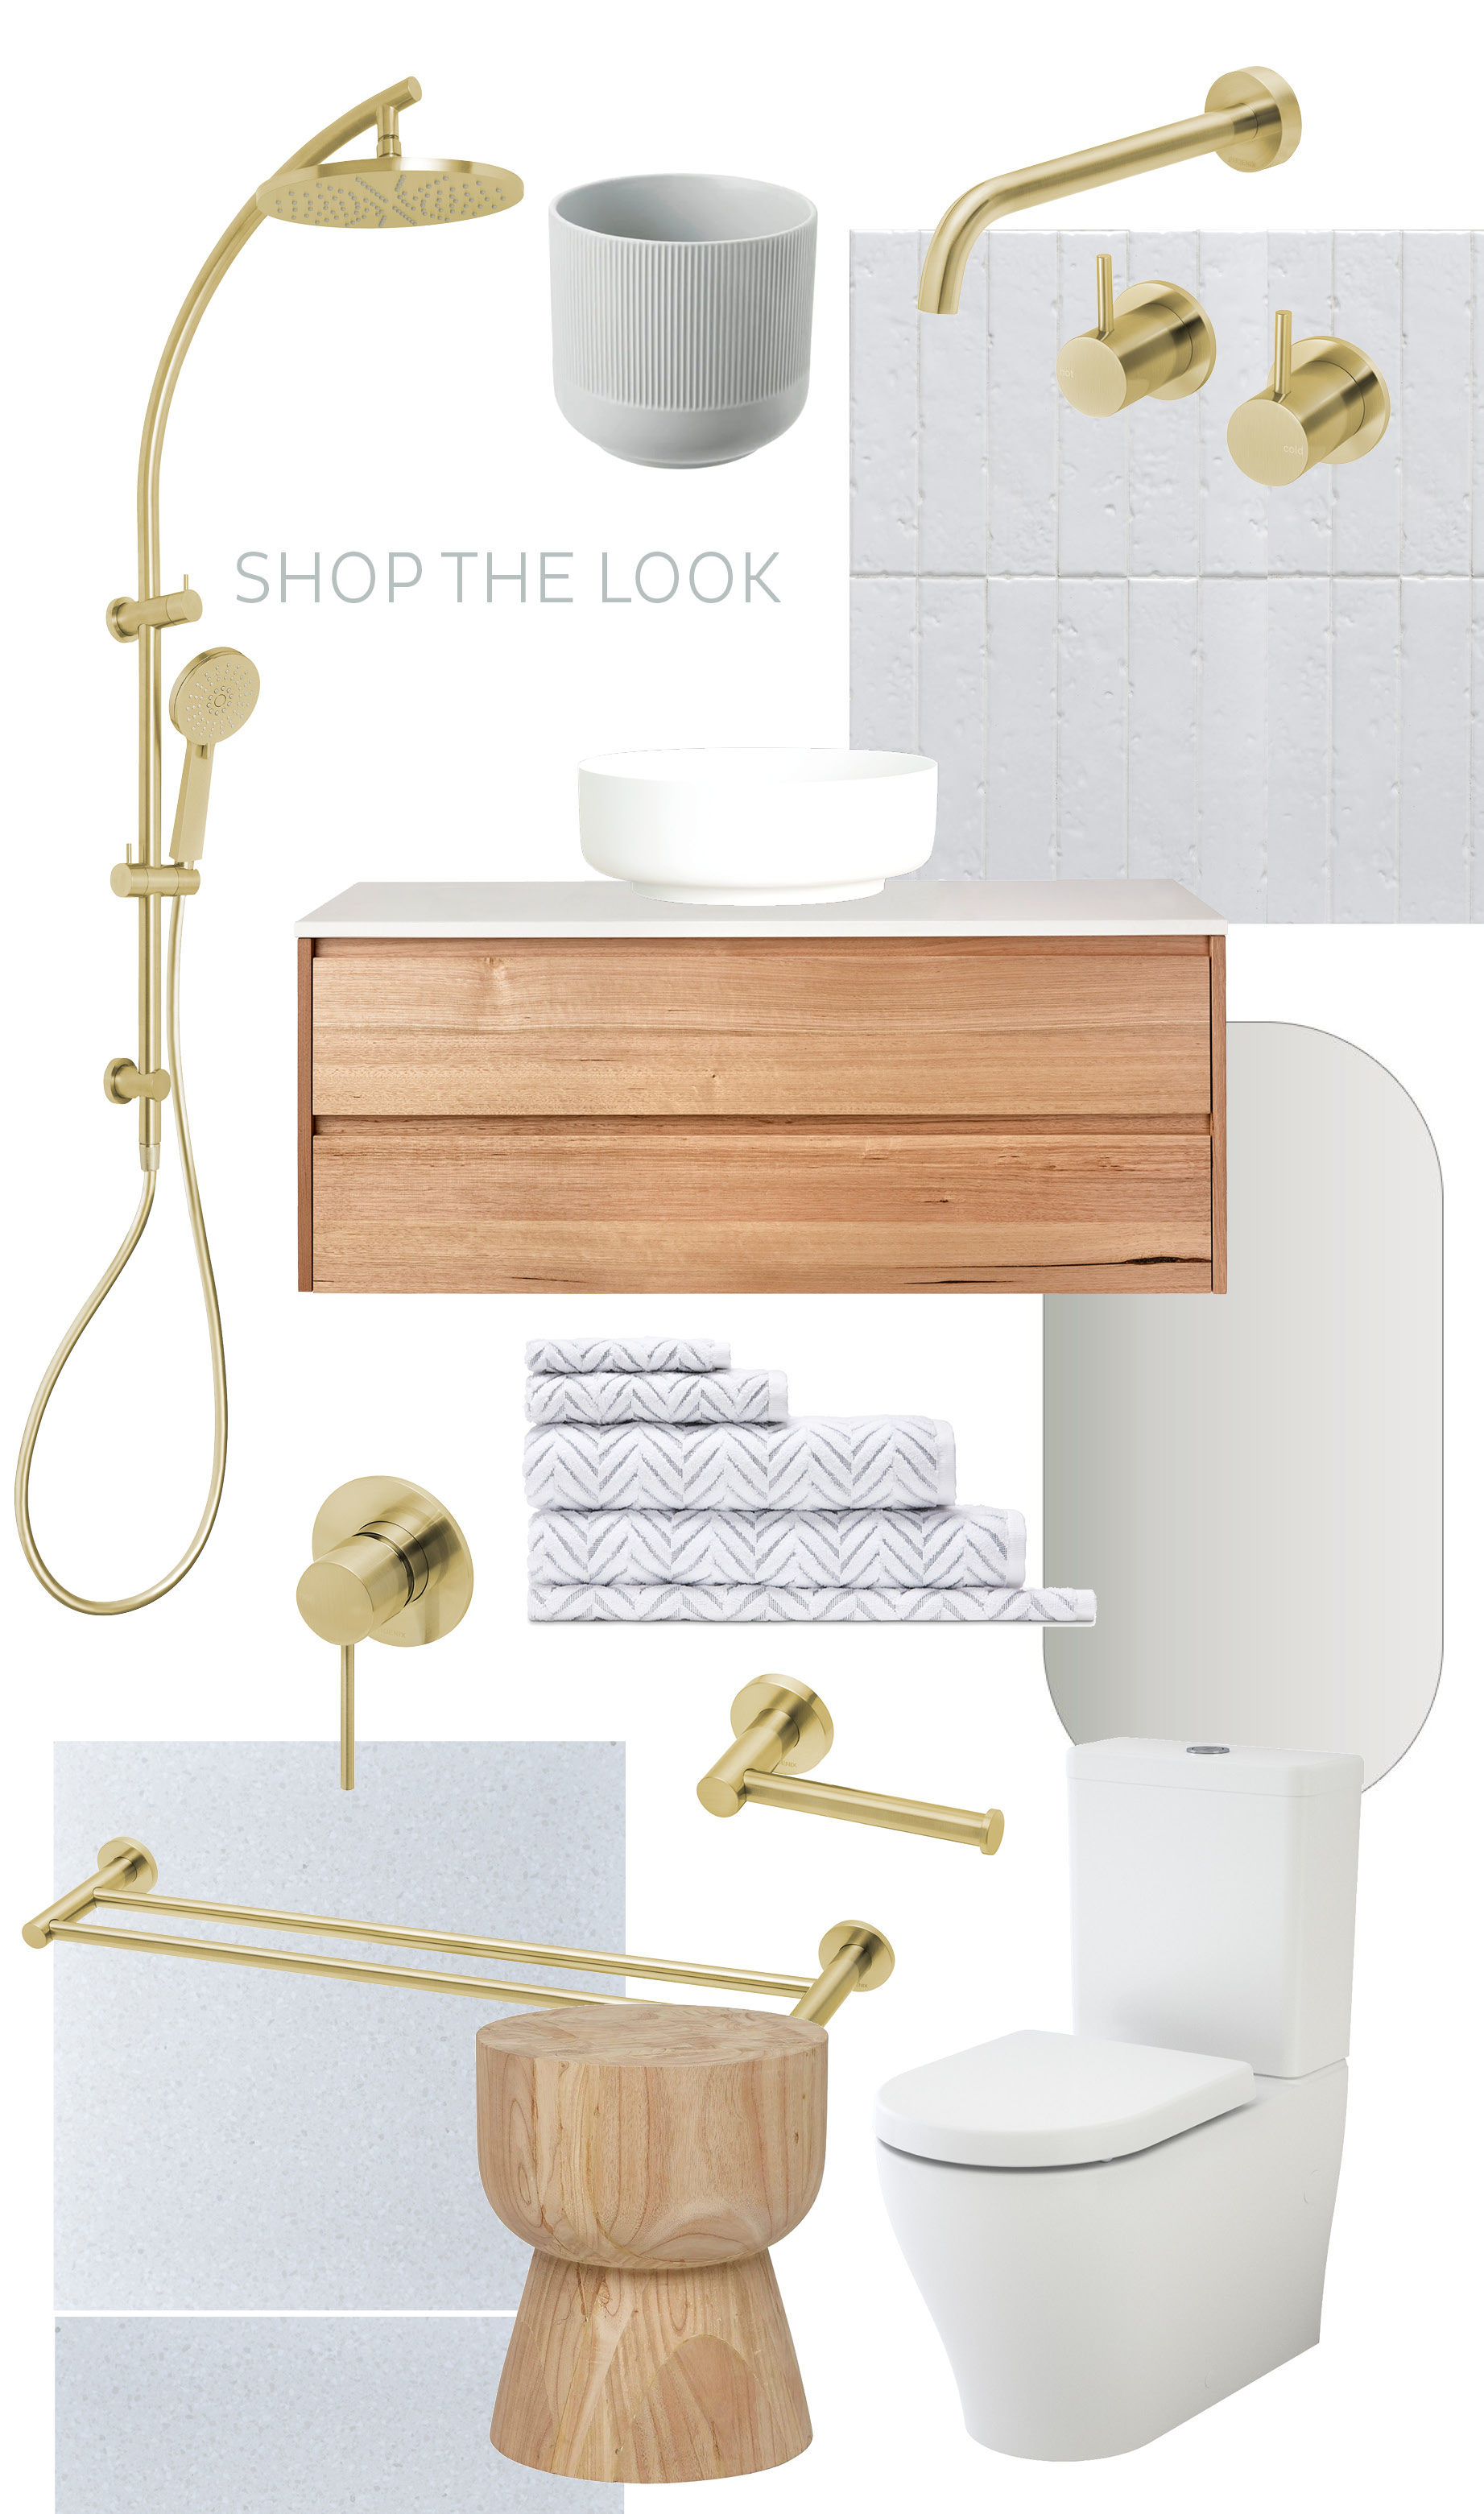 MY BATHROOM MUST-HAVES, Gallery posted by Megan Astri